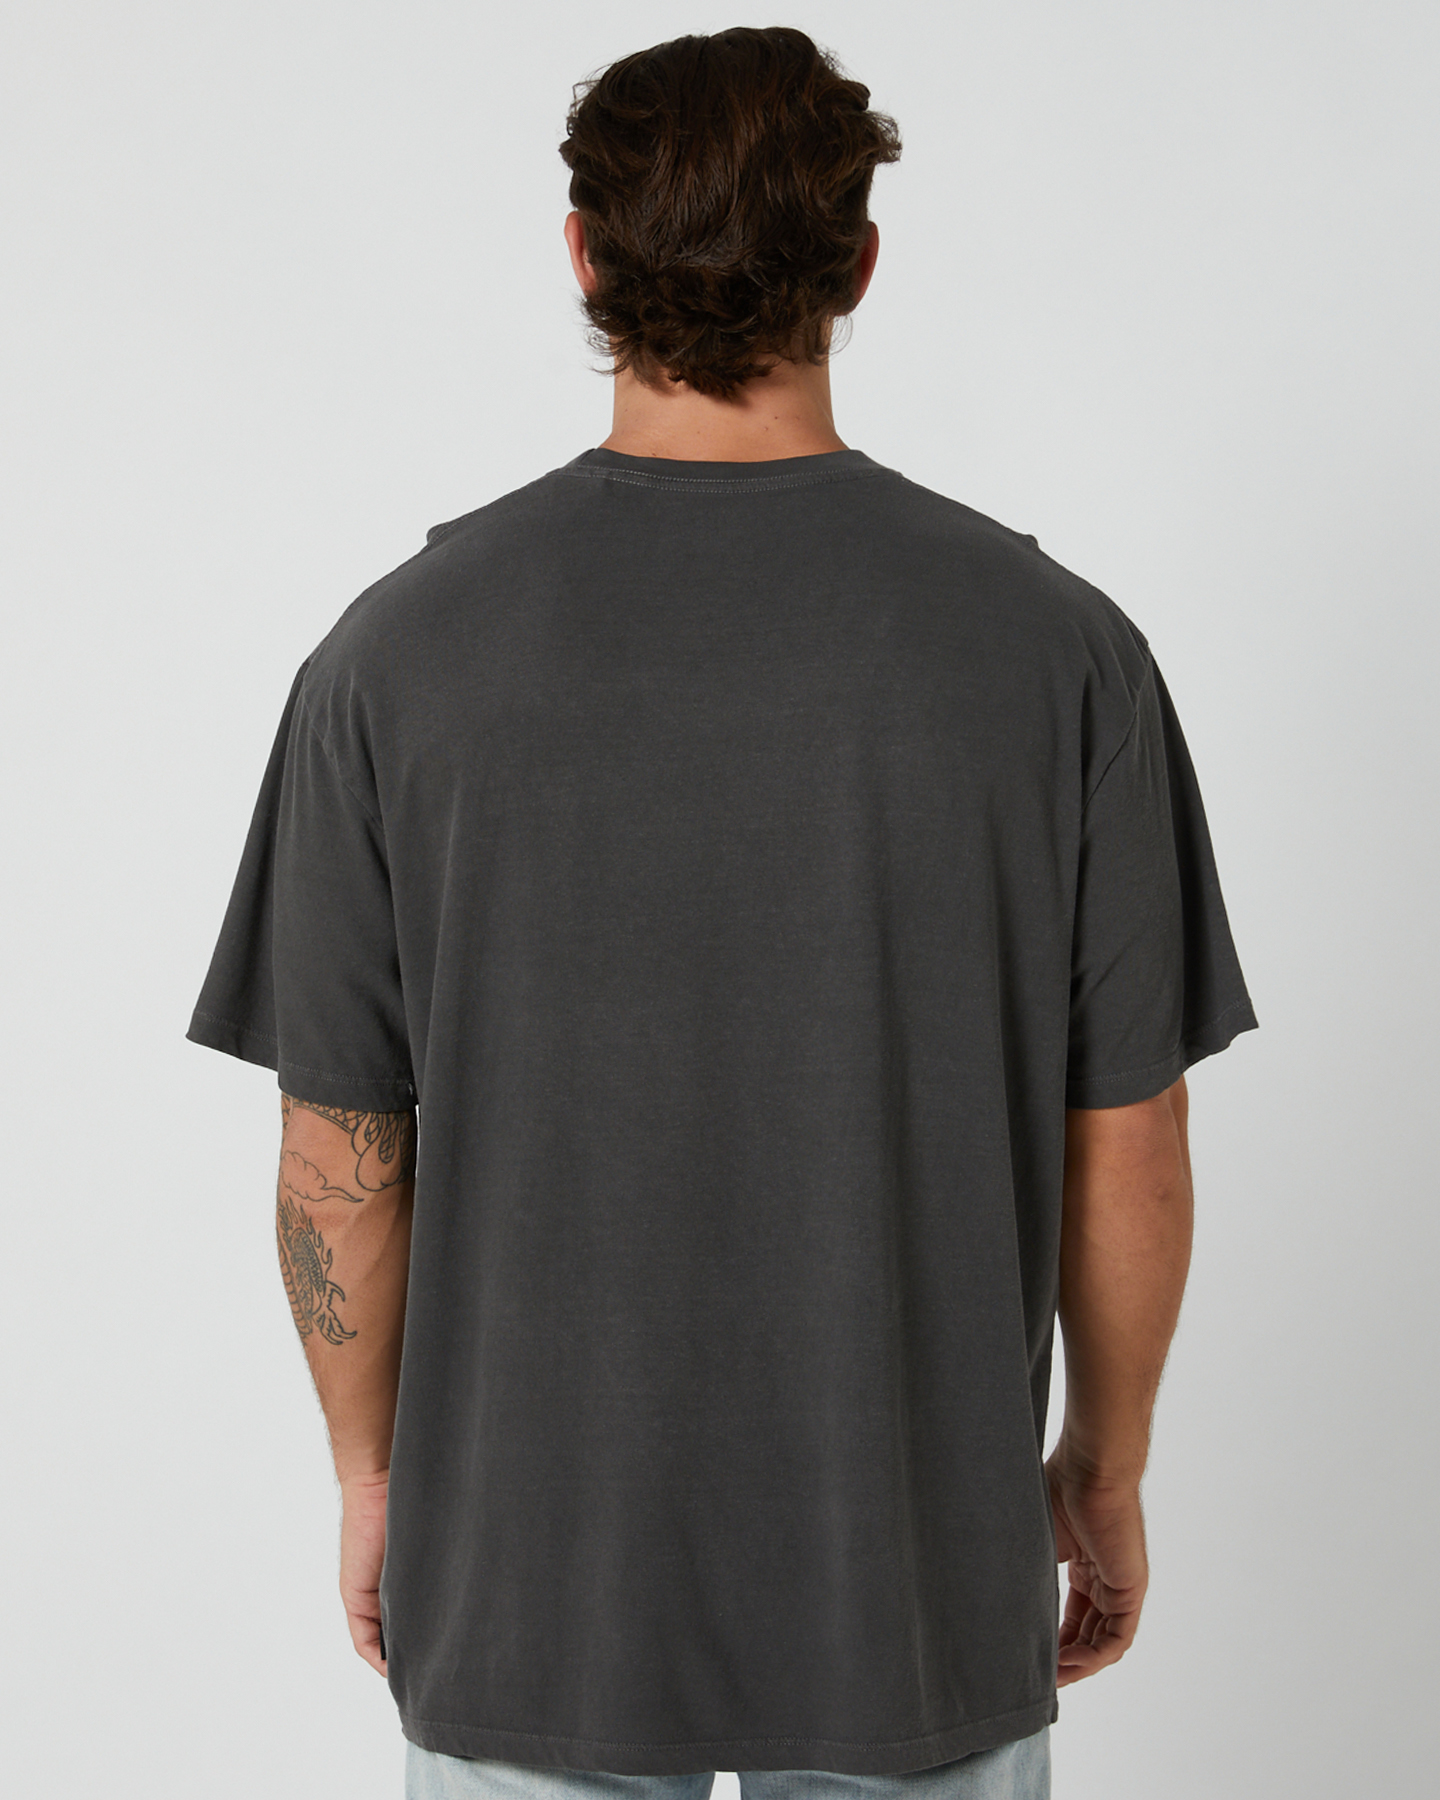 Silent Theory Psy Tee - Charcoal | SurfStitch